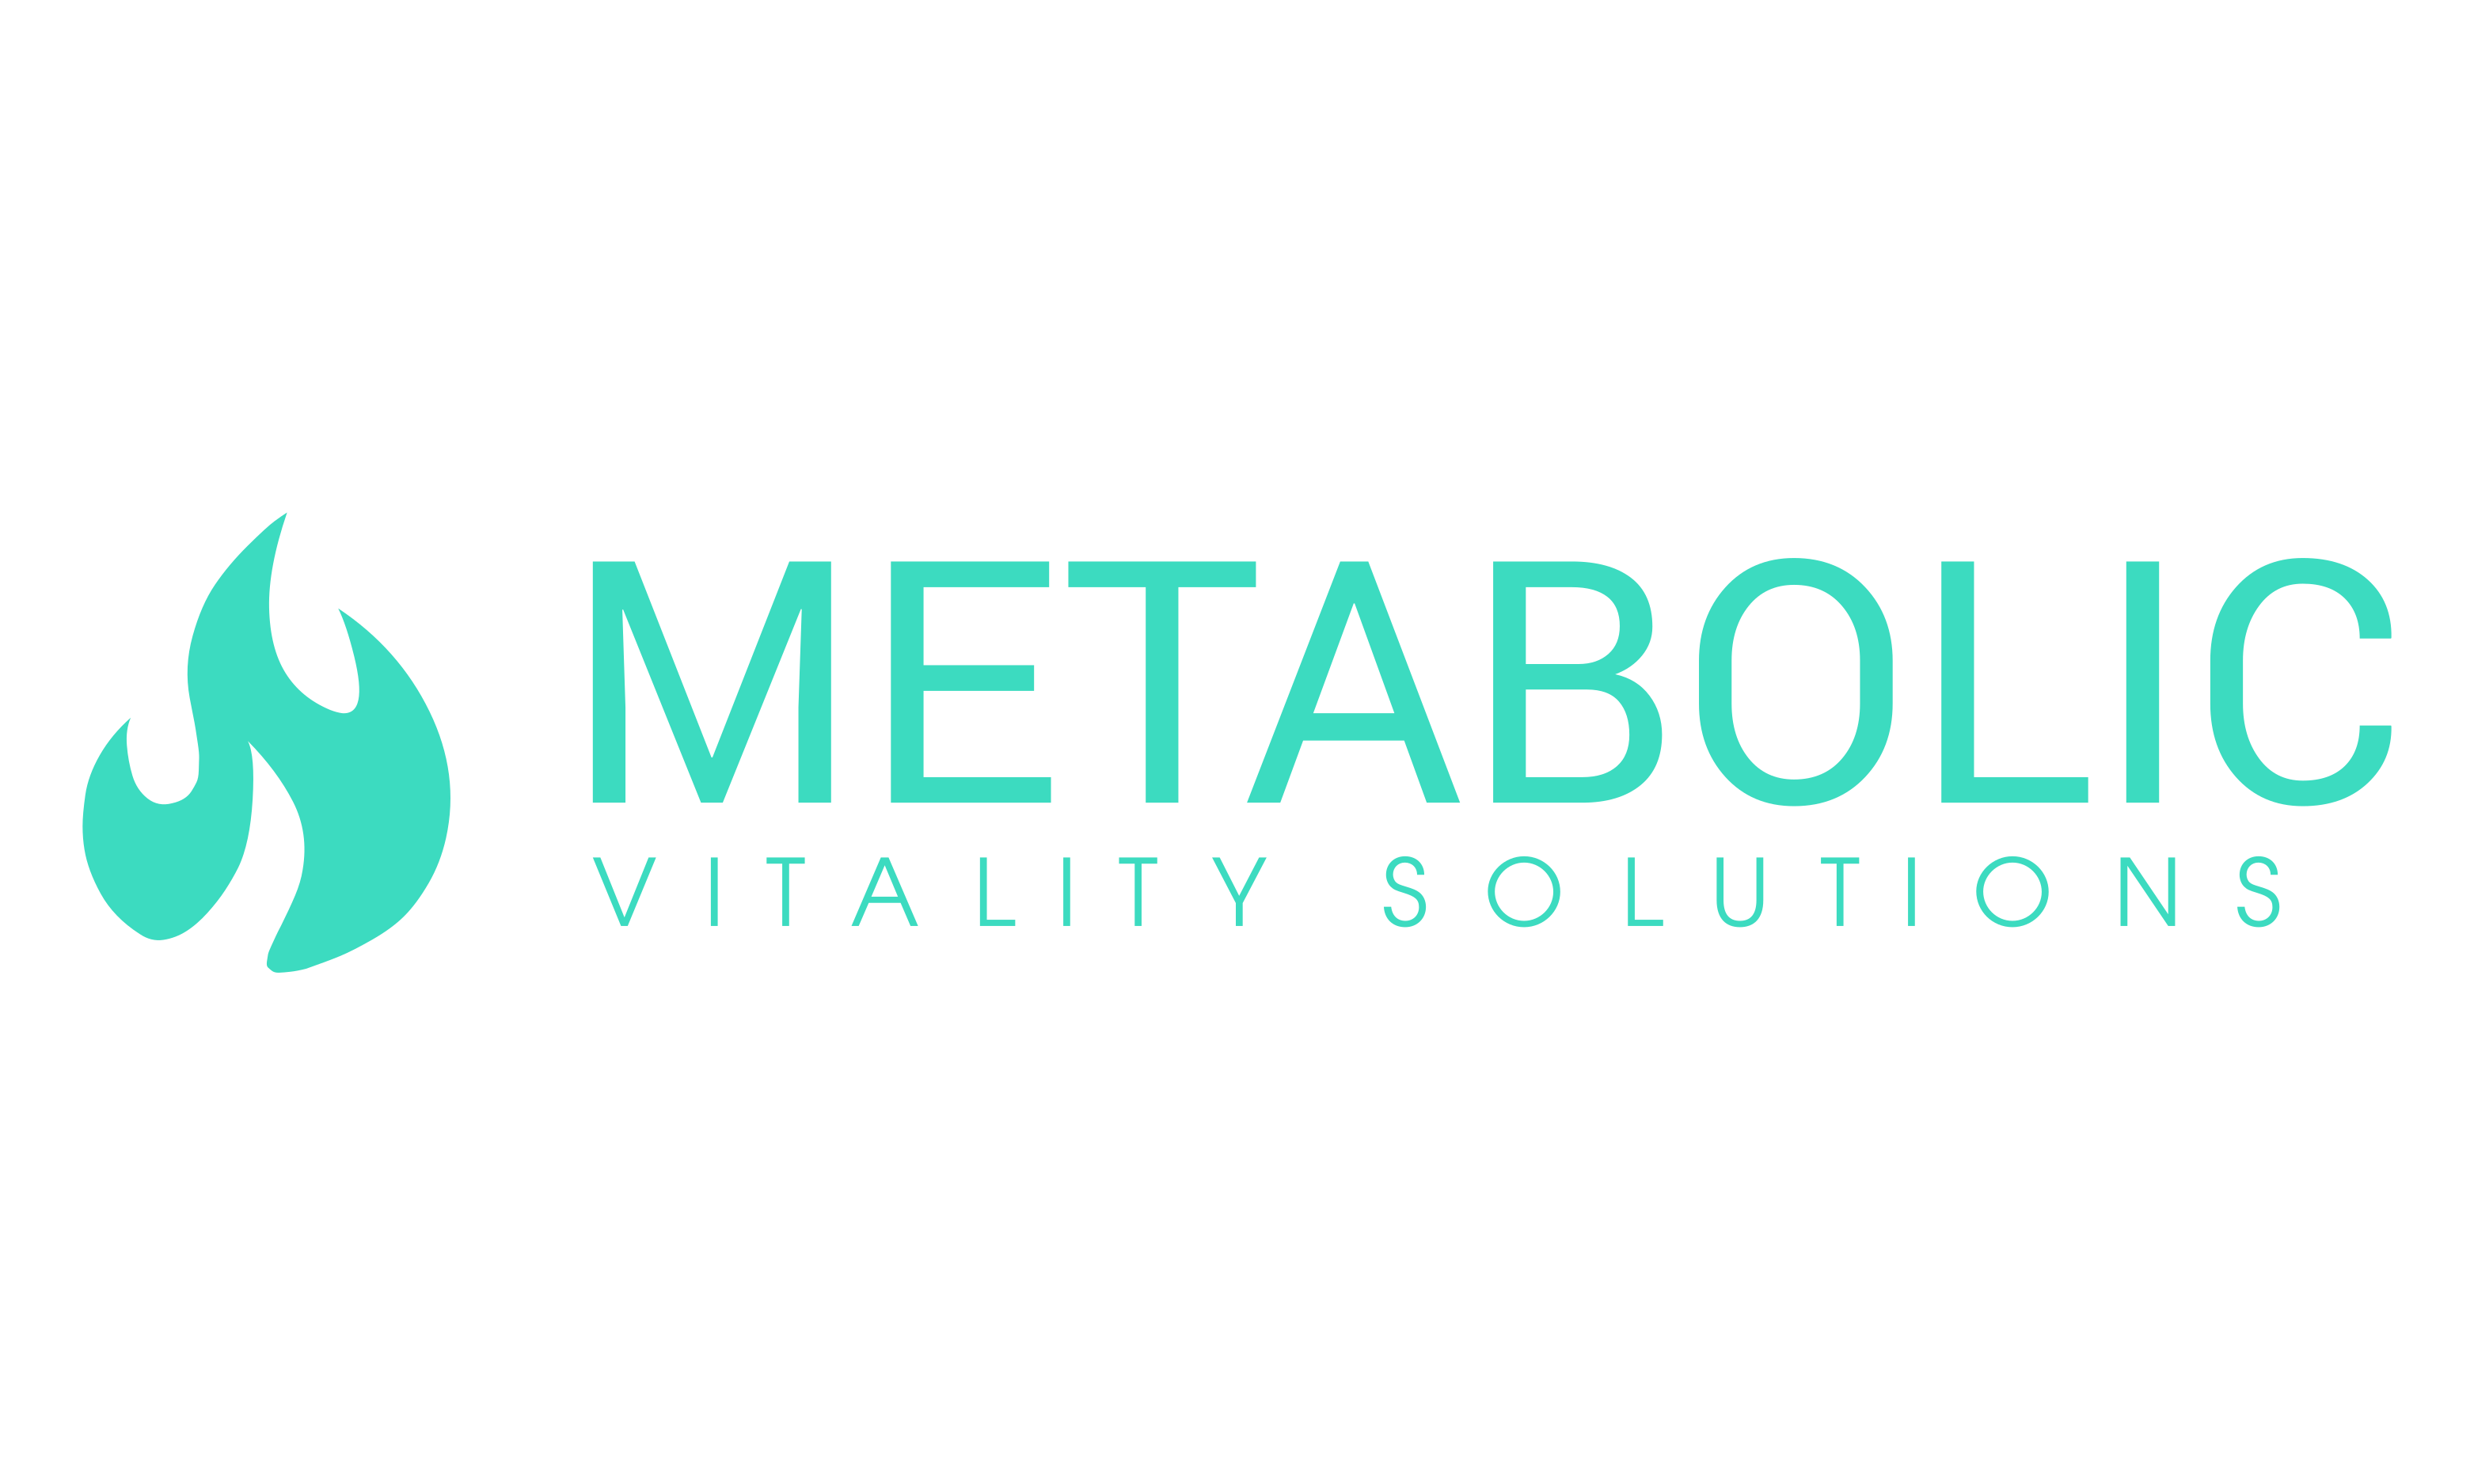 Home - Metabolic Vitality Solutions